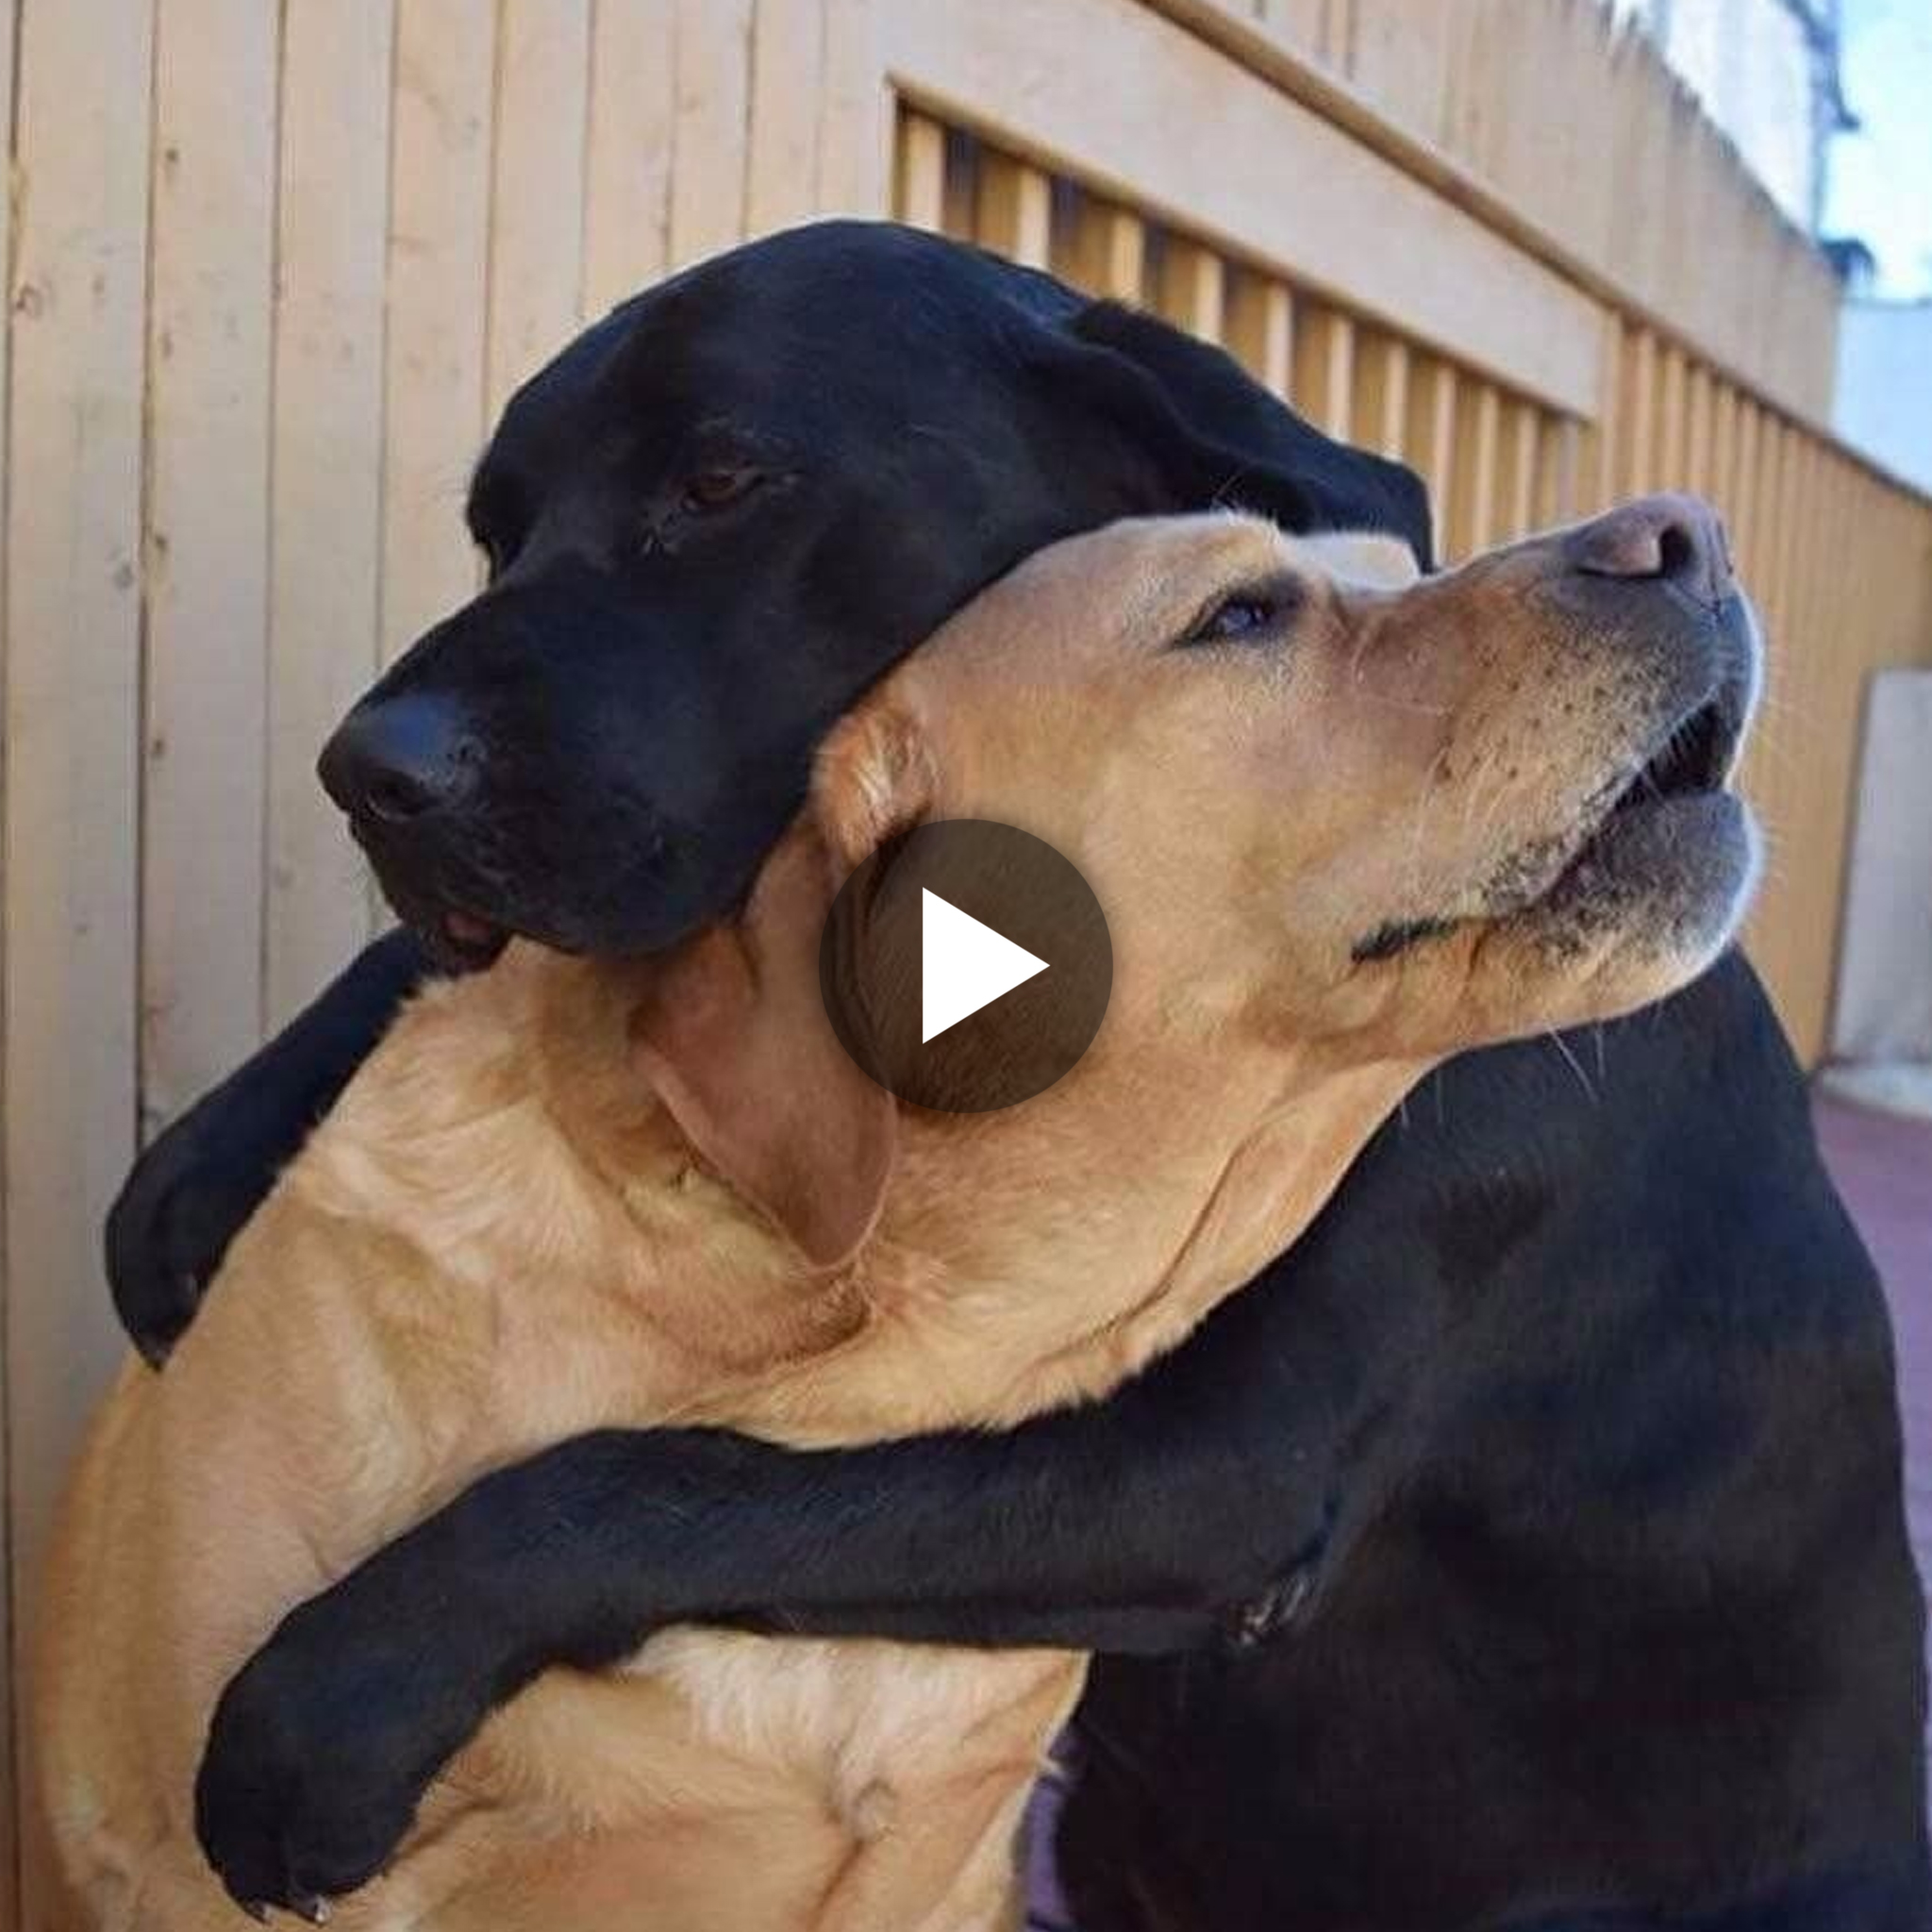 8 Months Later: Emotional Reunion of Two Lost Dogs, A Heartwarming Hug Brings Tears of Joy to Millions of Viewers.